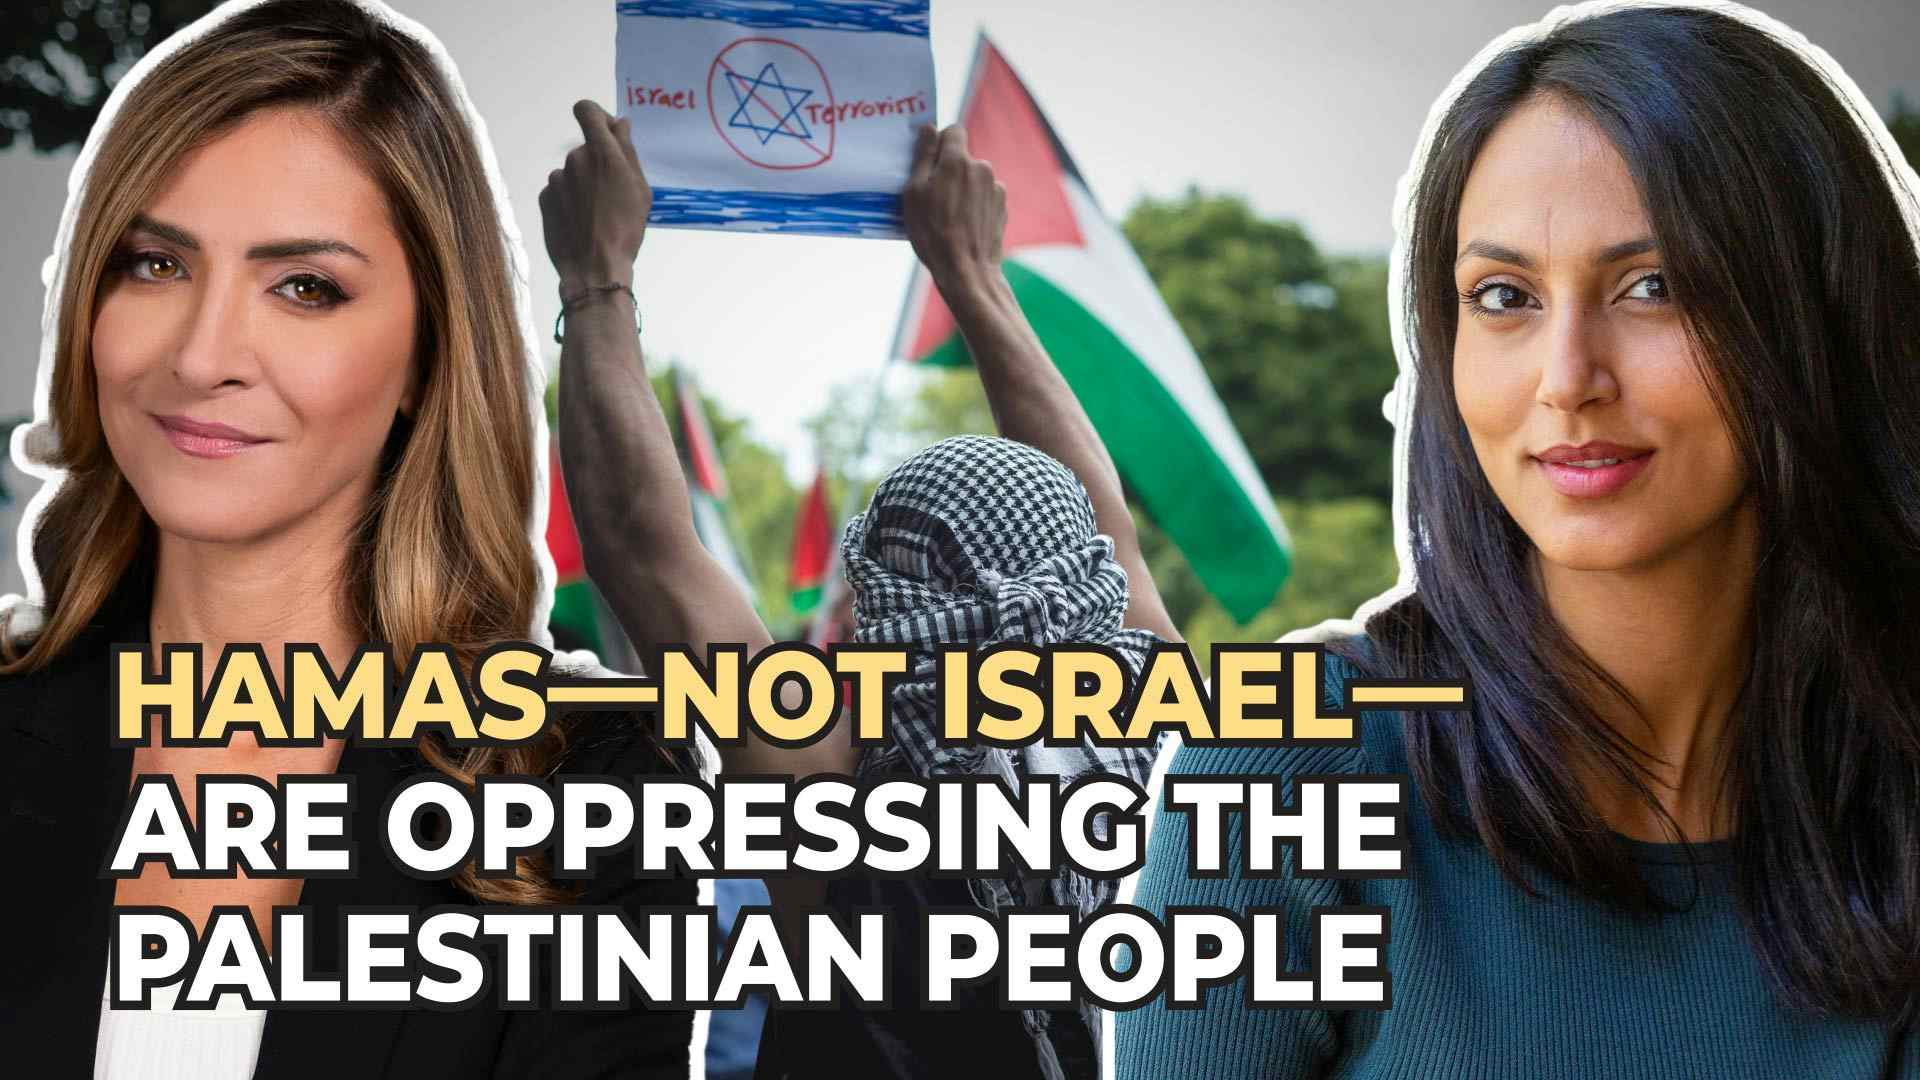 Hamas-not Israel-are Oppressing the Palestinian People